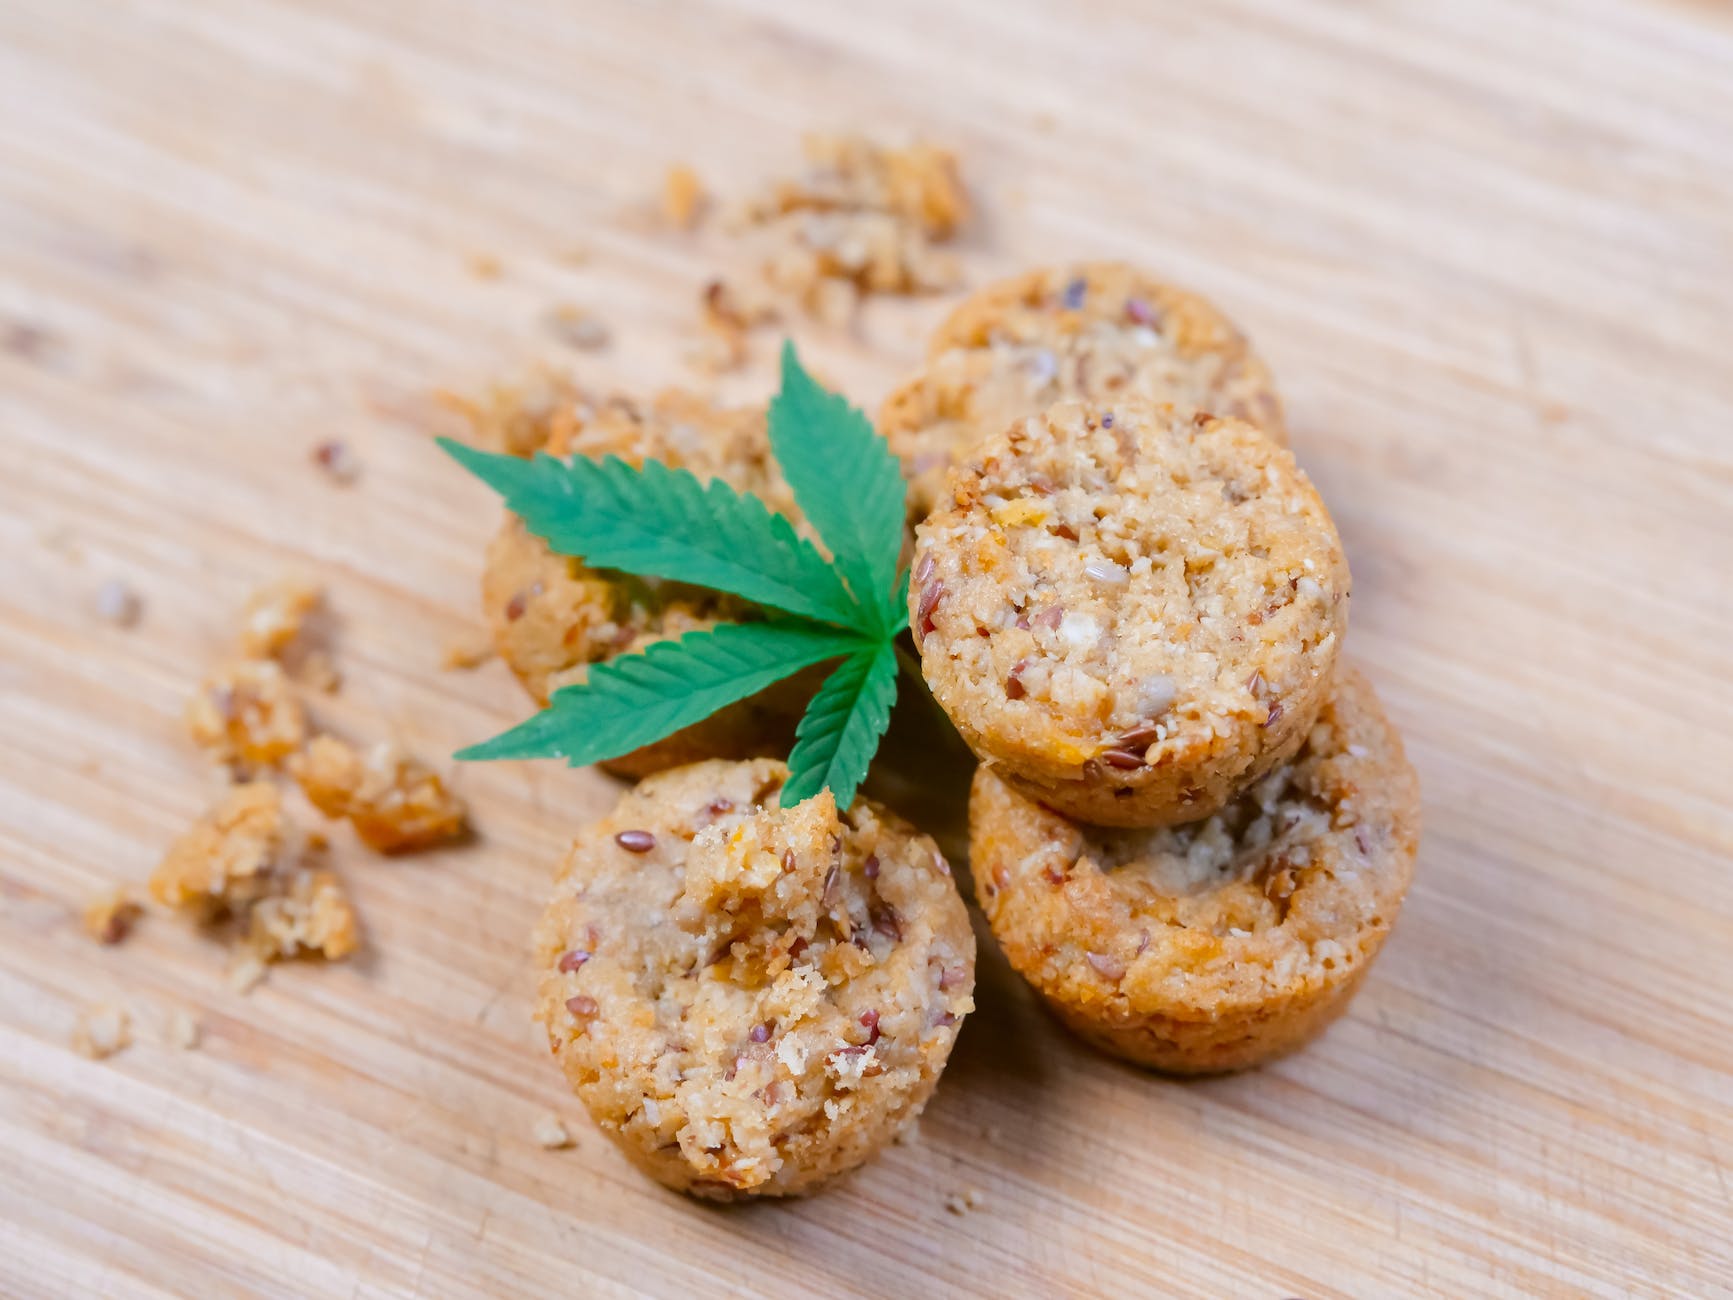 Cannabis Edibles Dosage Guide: How to Calculate and Control Potency